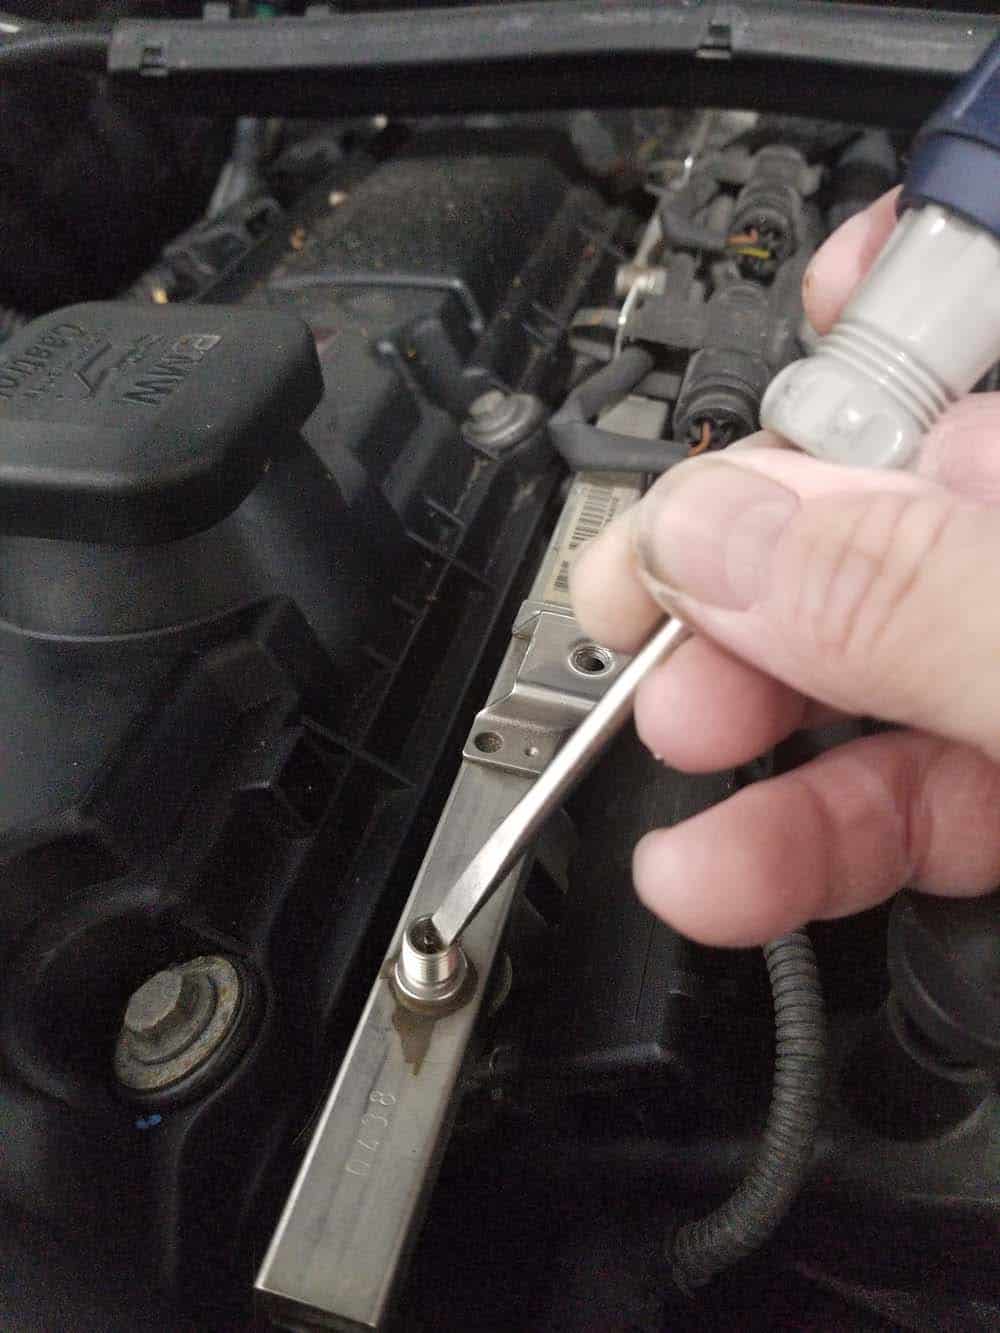 bmw fuel pressure test - Use a flat blade screwdriver to release the pressure in the fuel rail